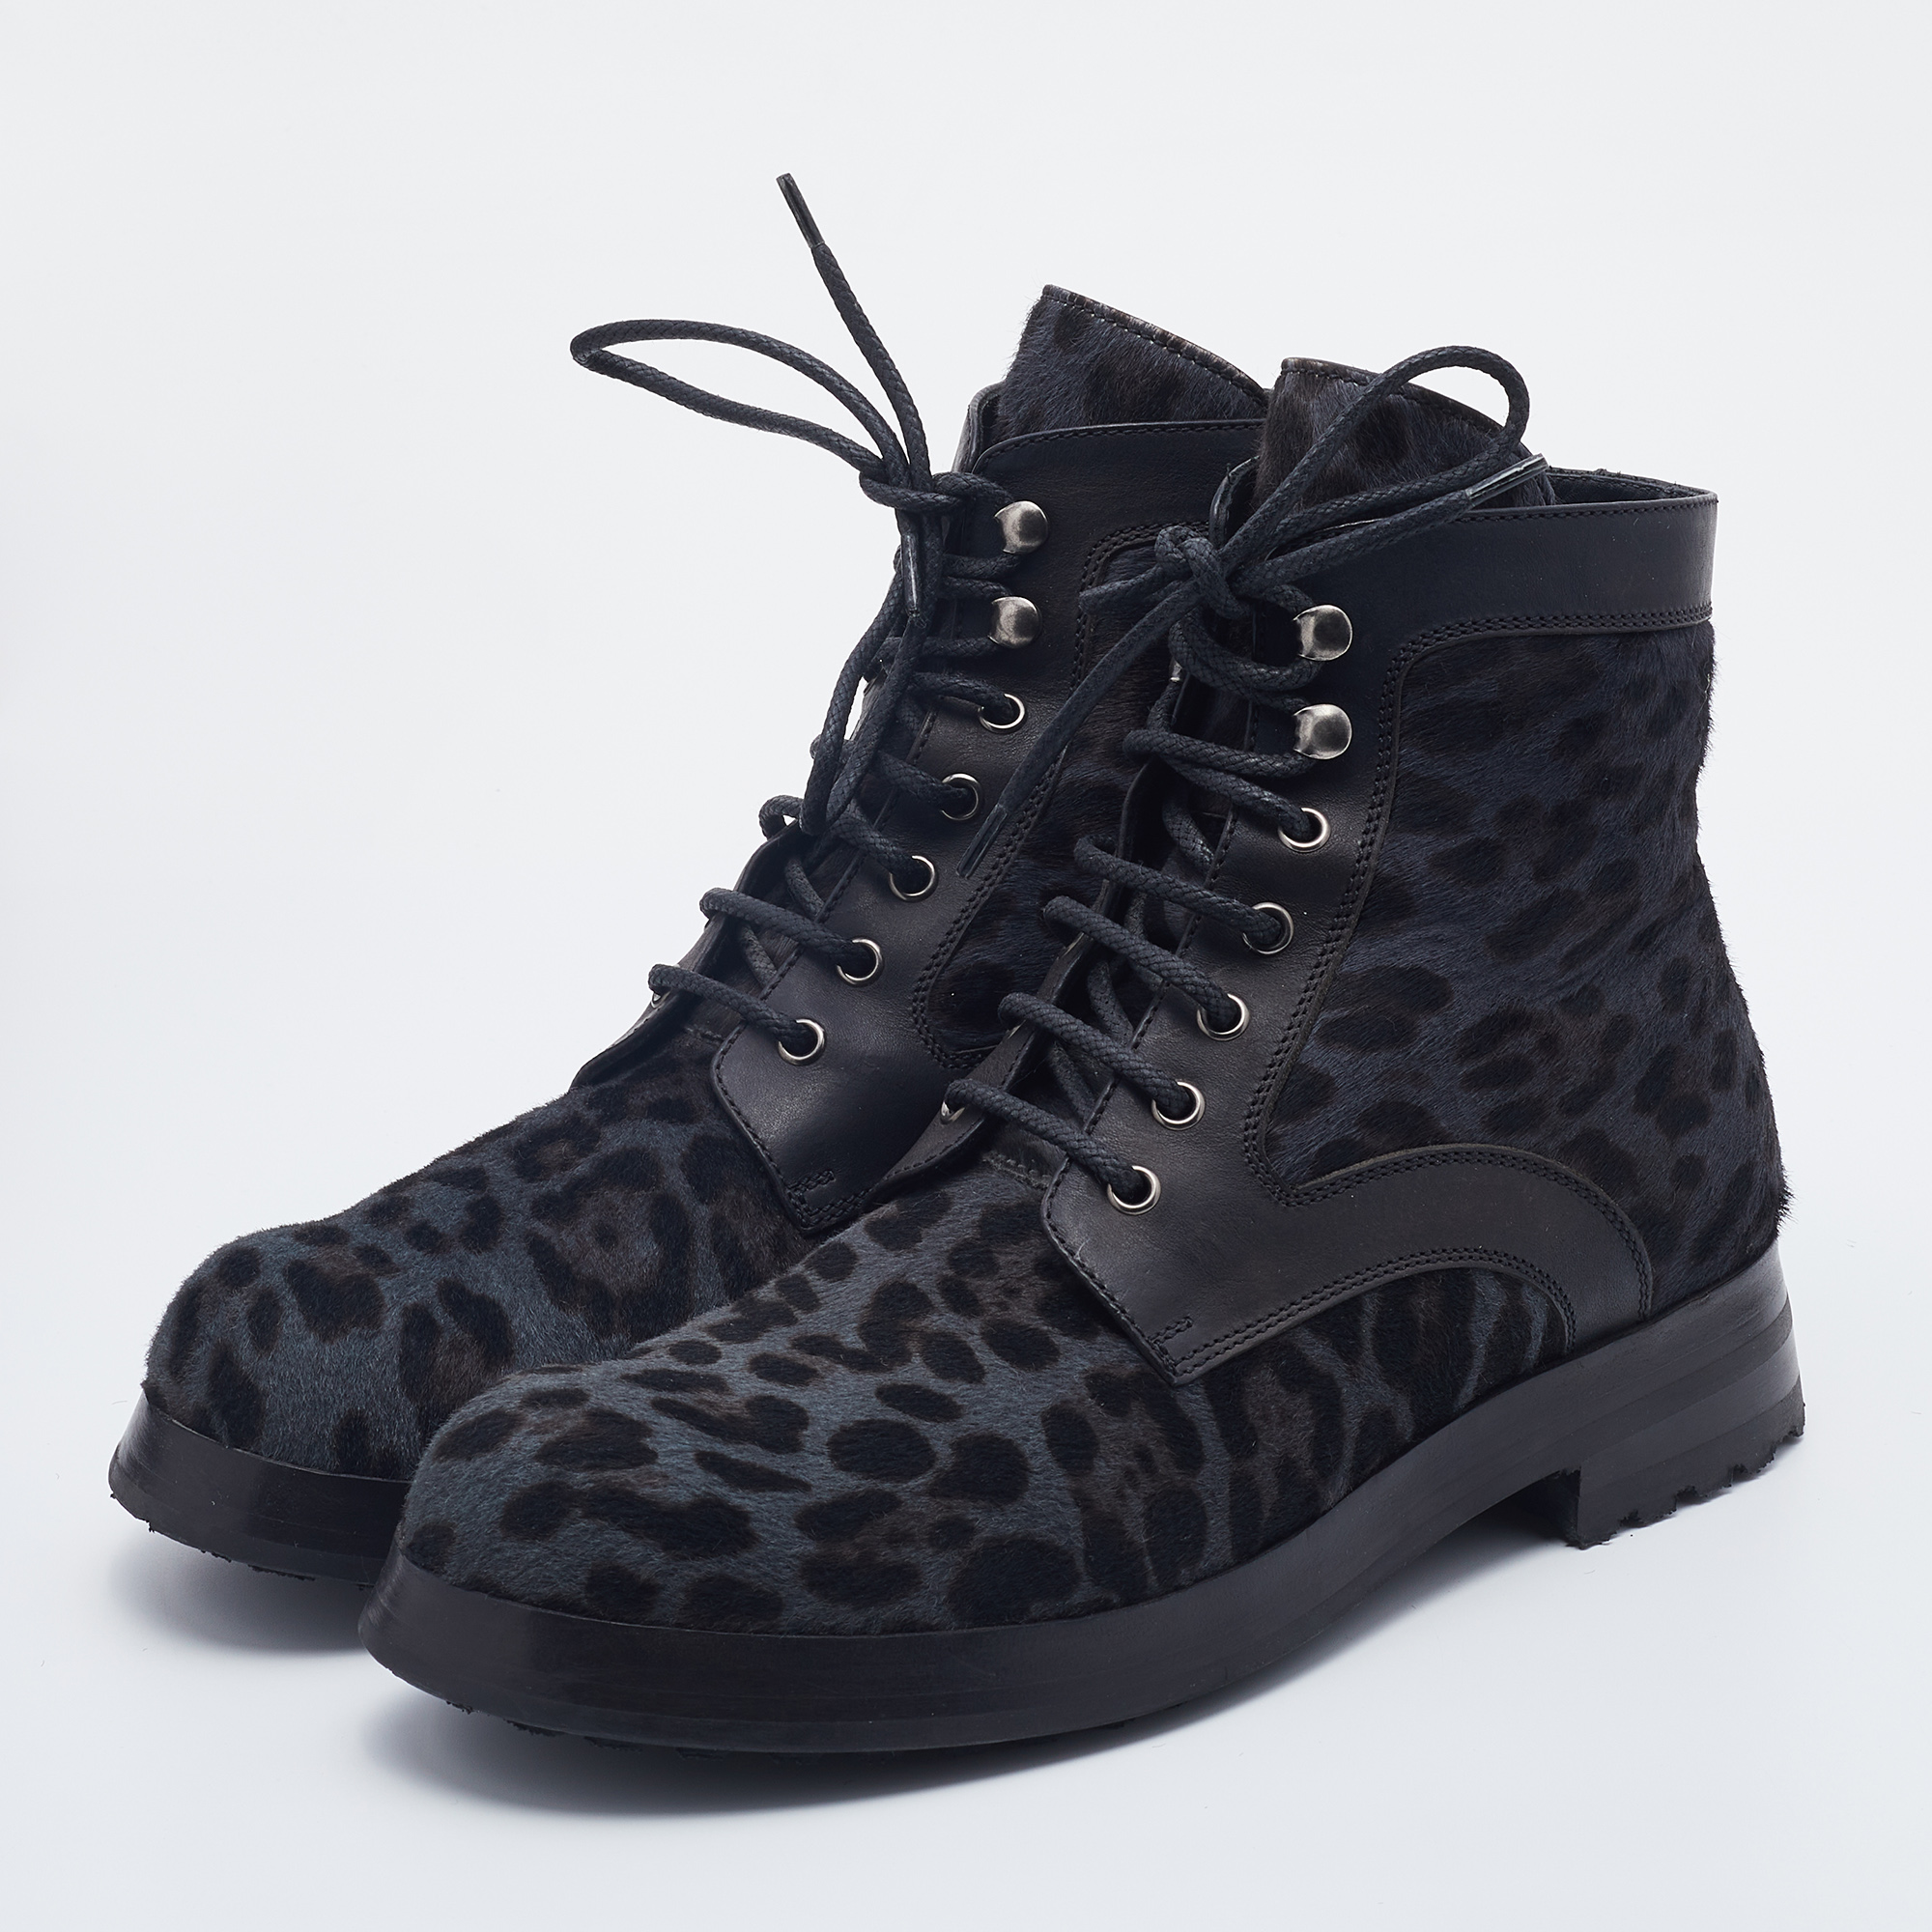 

Dolce & Gabbana Grey/Black Leopard Print Calf Hair And Leather Combat Boots Size